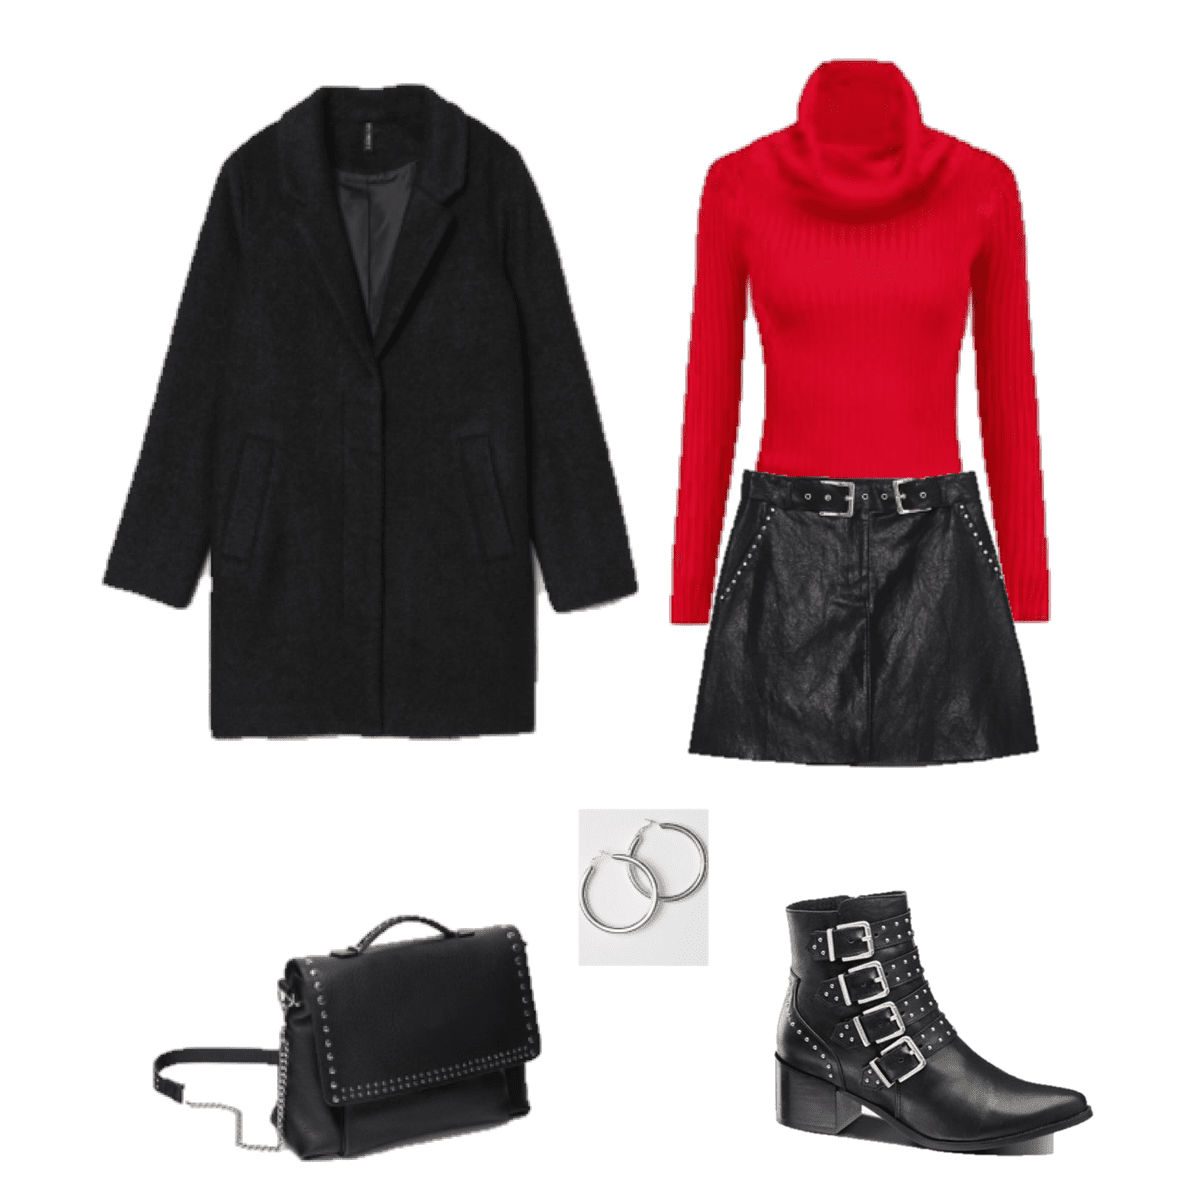 Outfit of the Day: Red and Leather